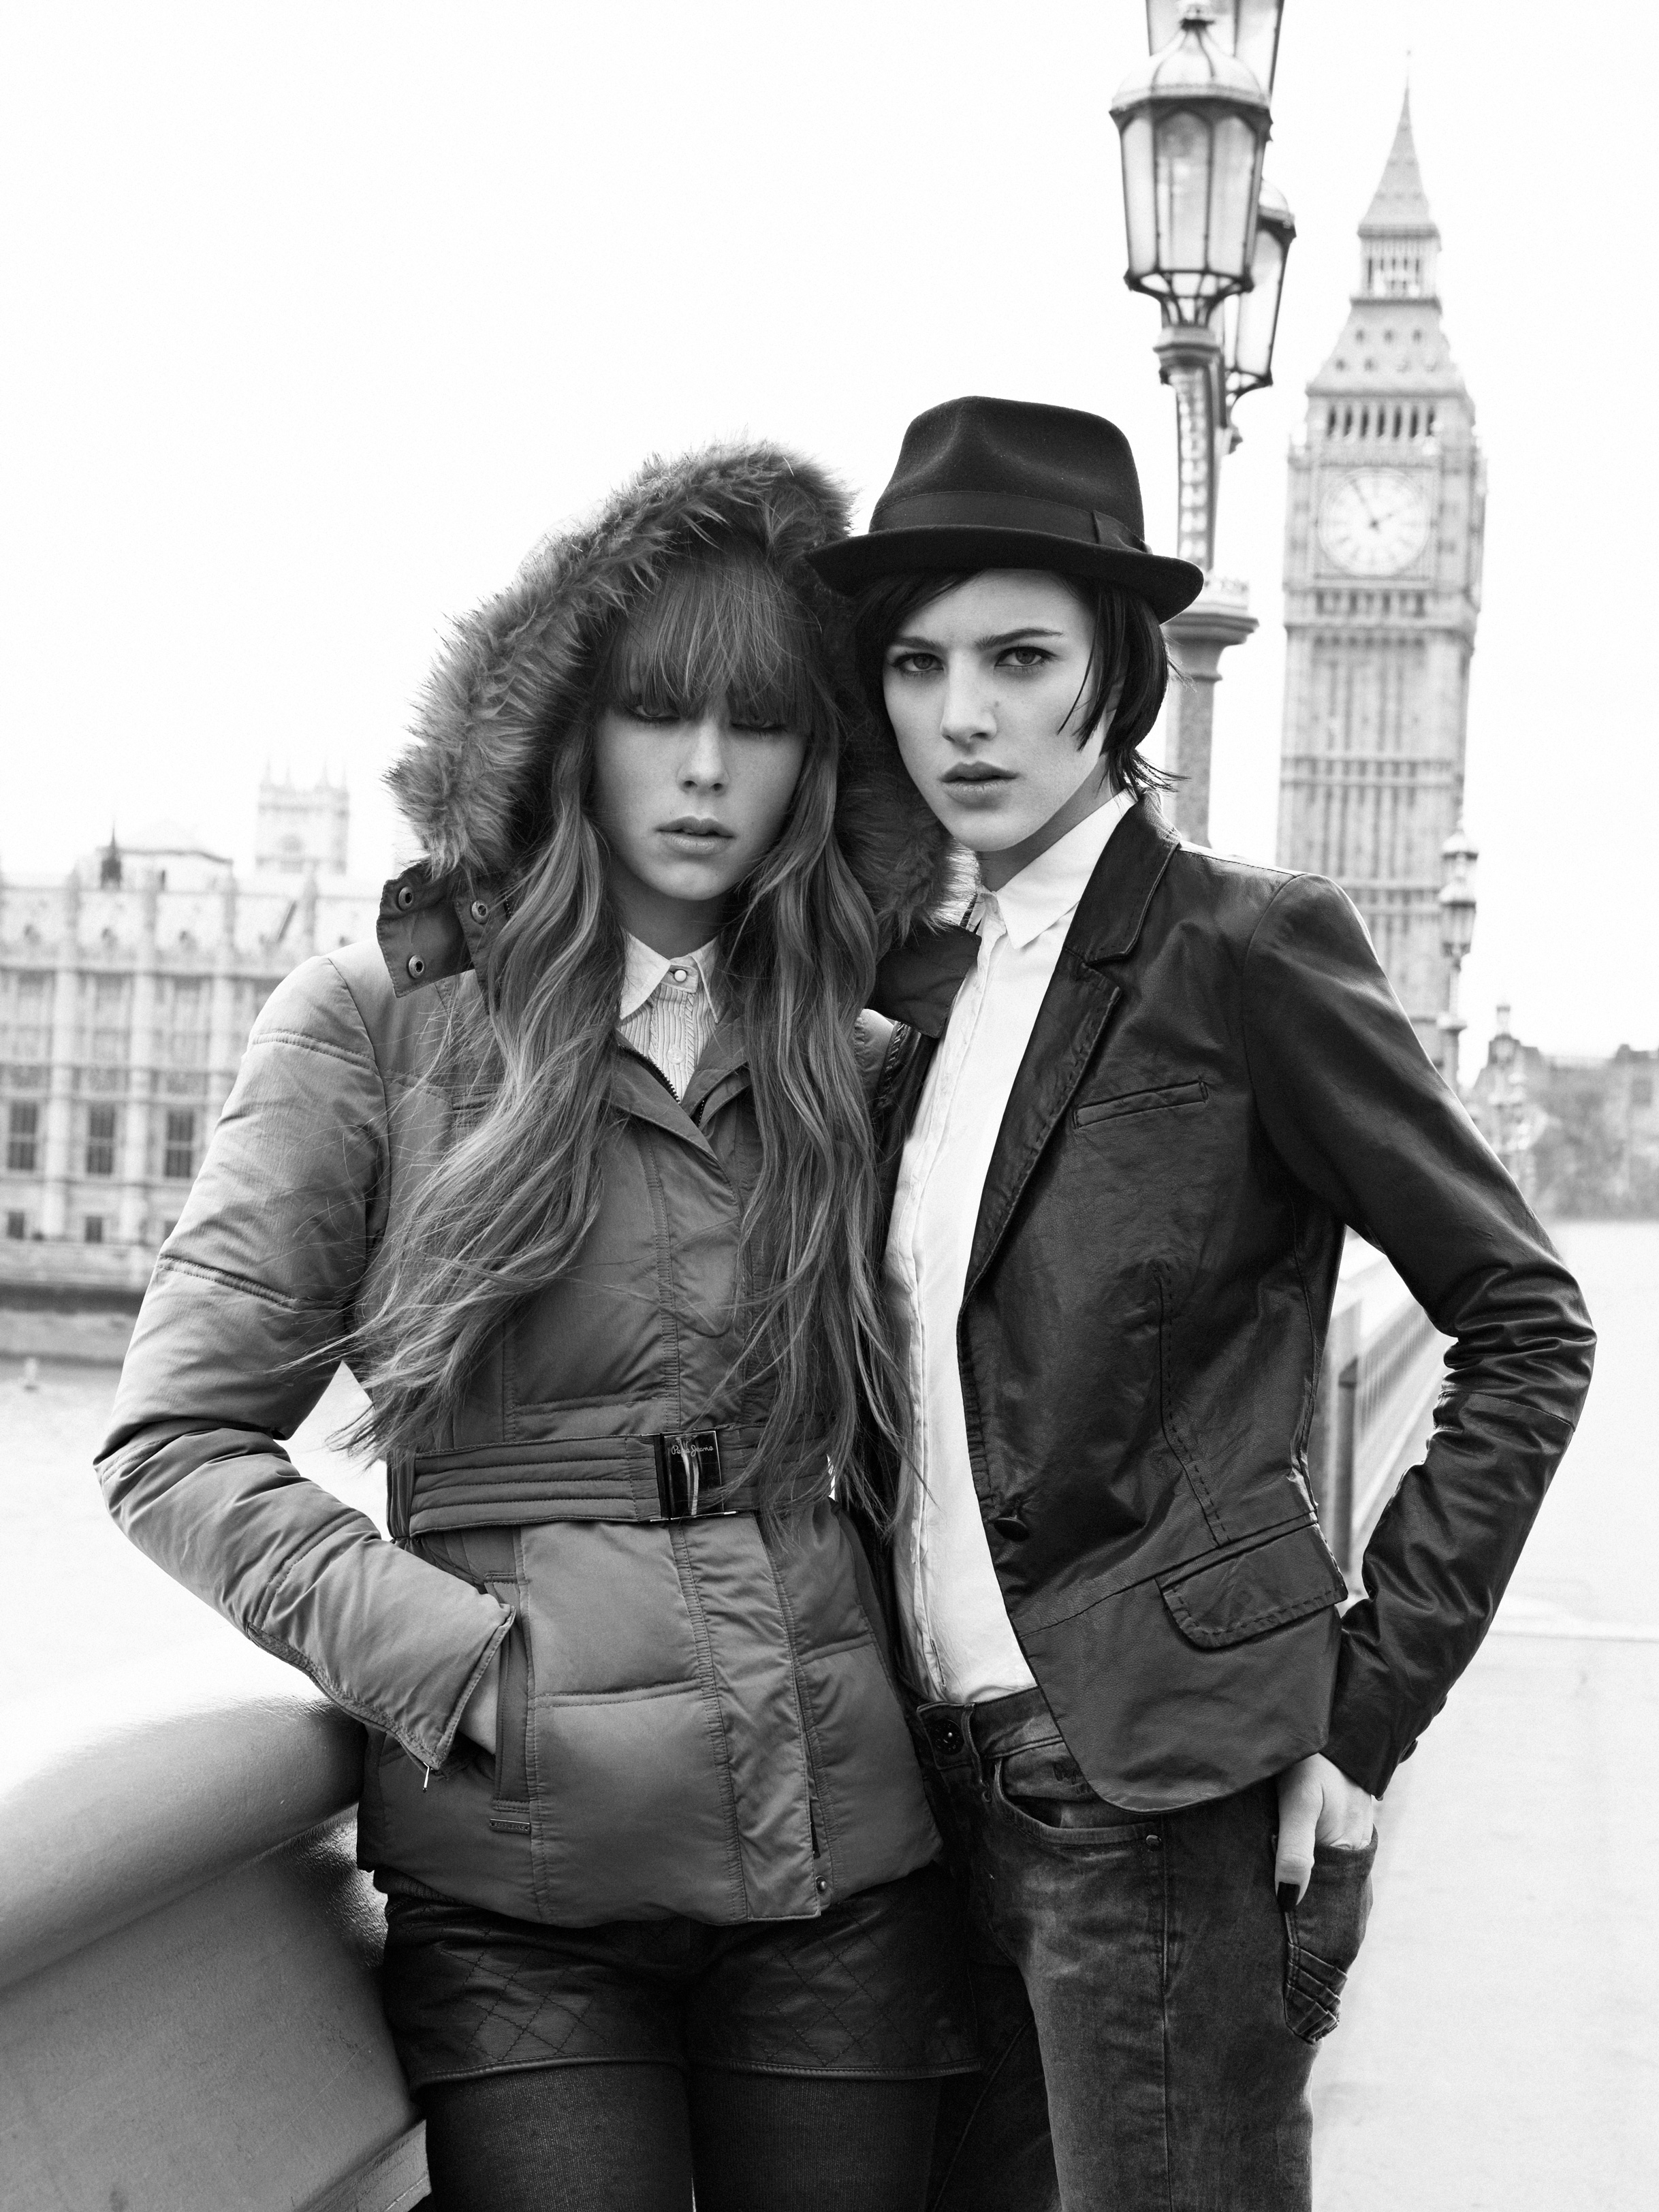 Pepe Jeans AW 2012 Ad Campaign 10